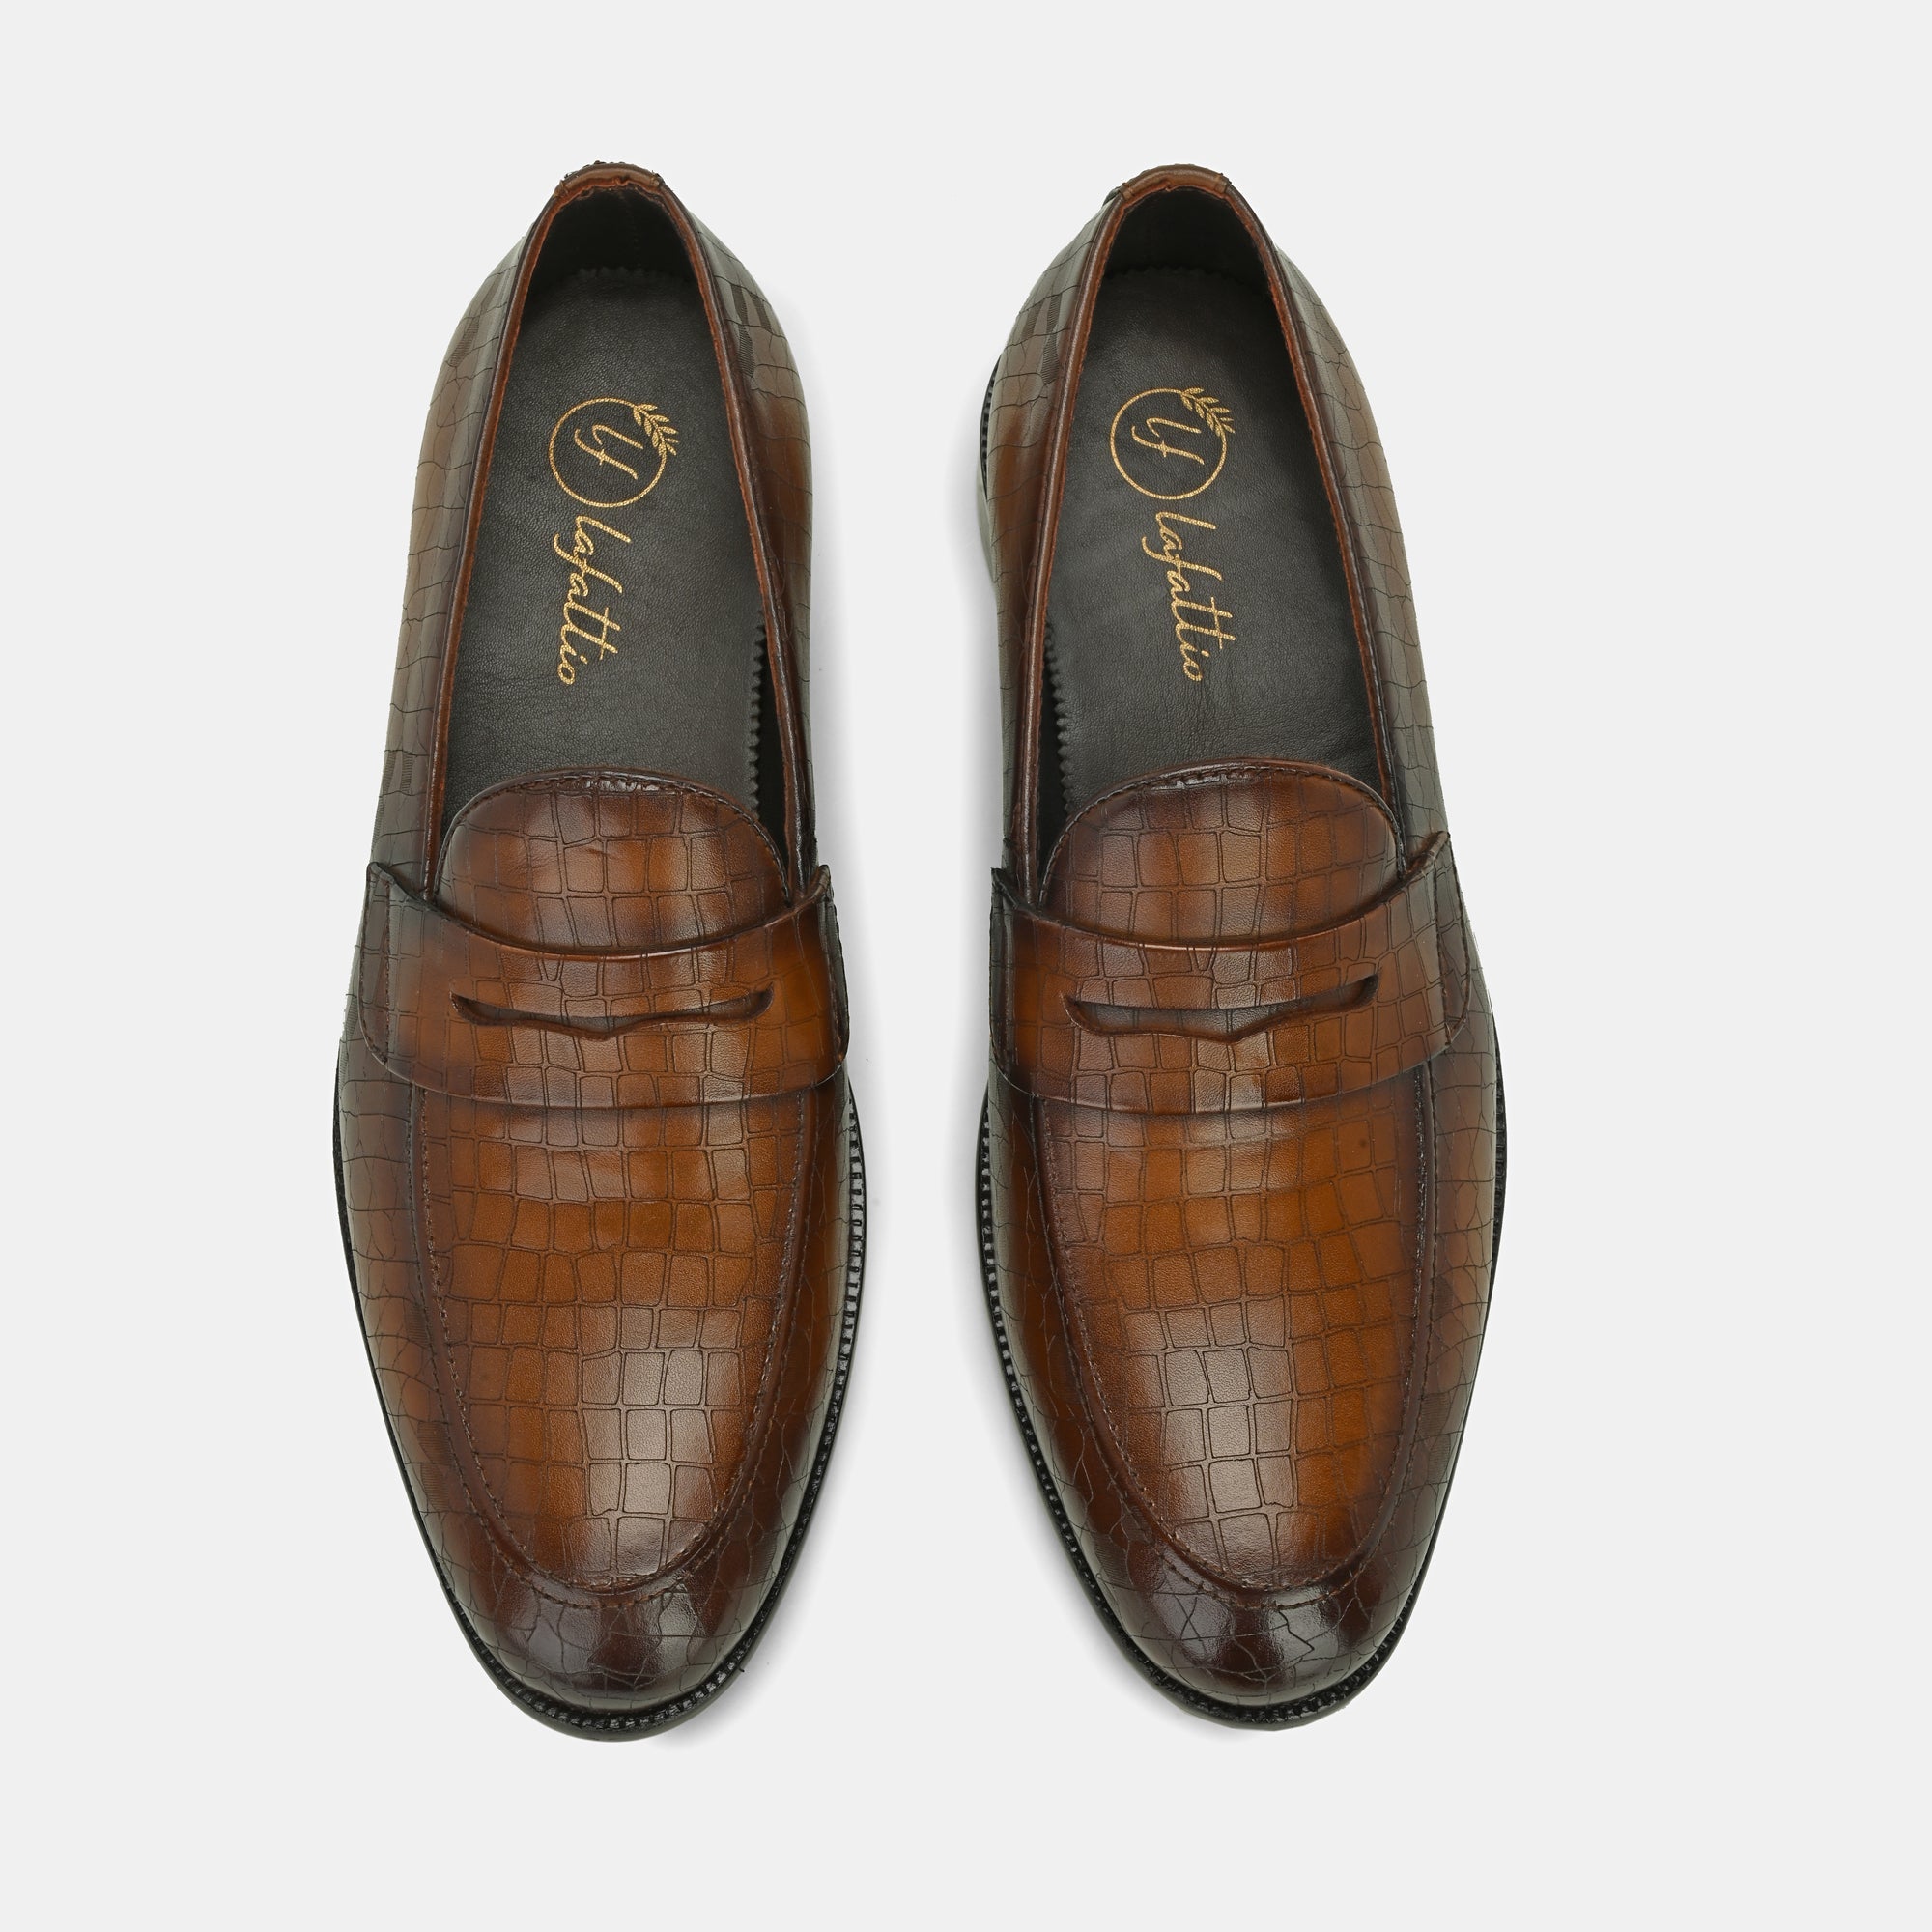 Tan Laser Engraved Penny Loafers By Lafattio